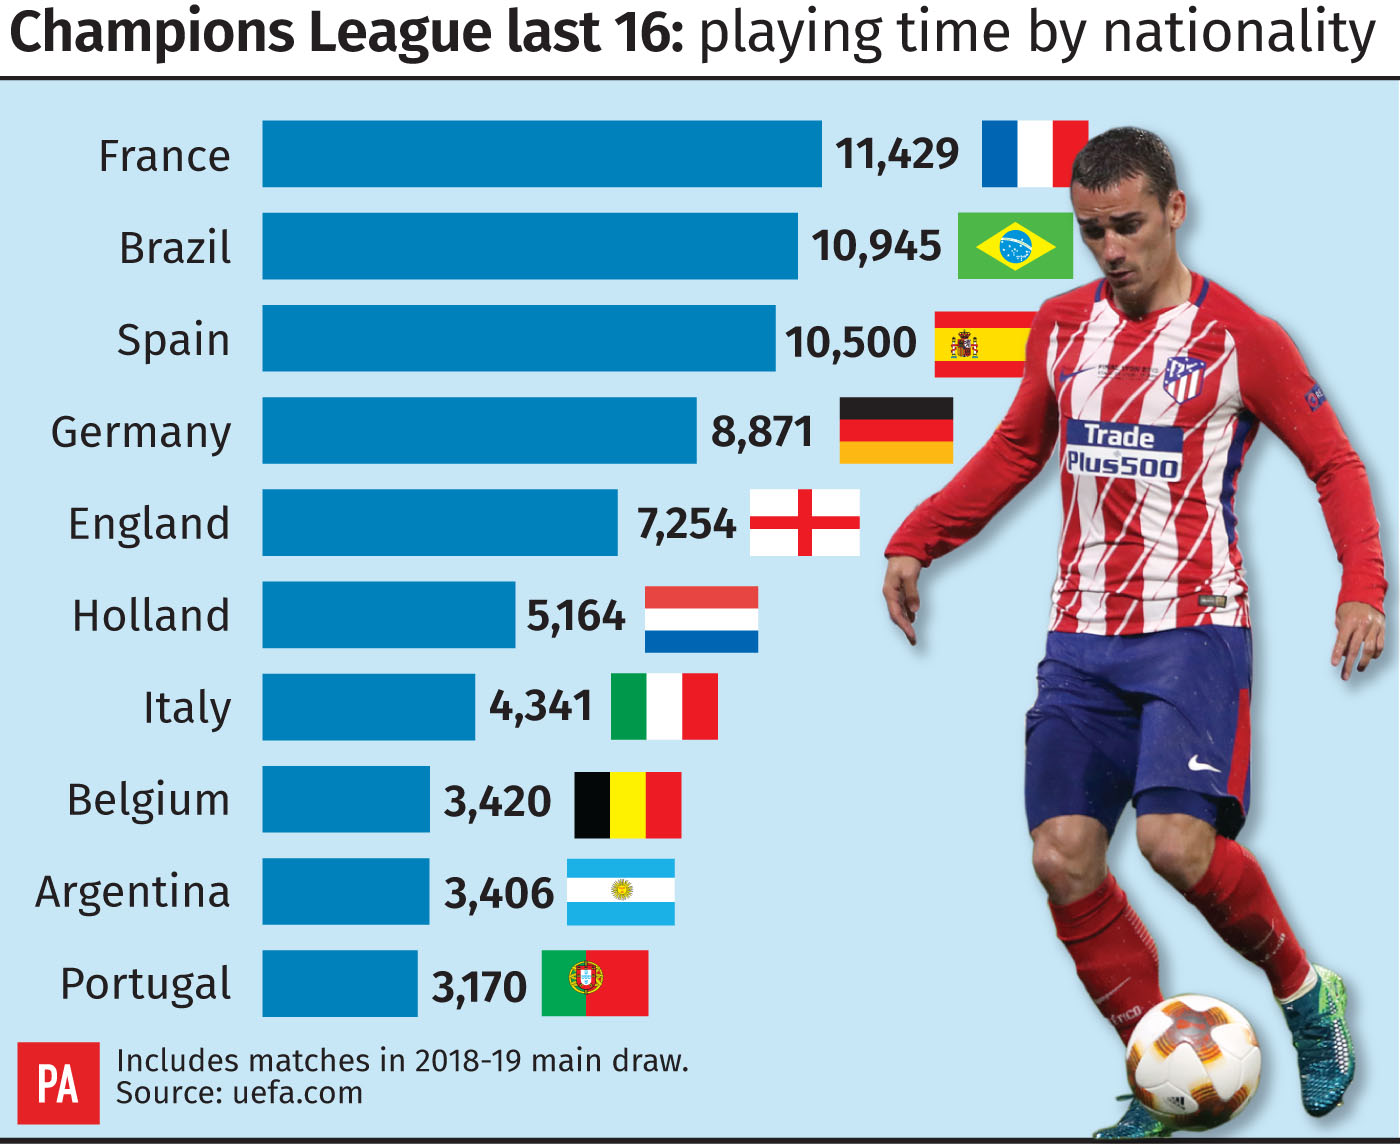 Champions League last 16: playing time by nationality